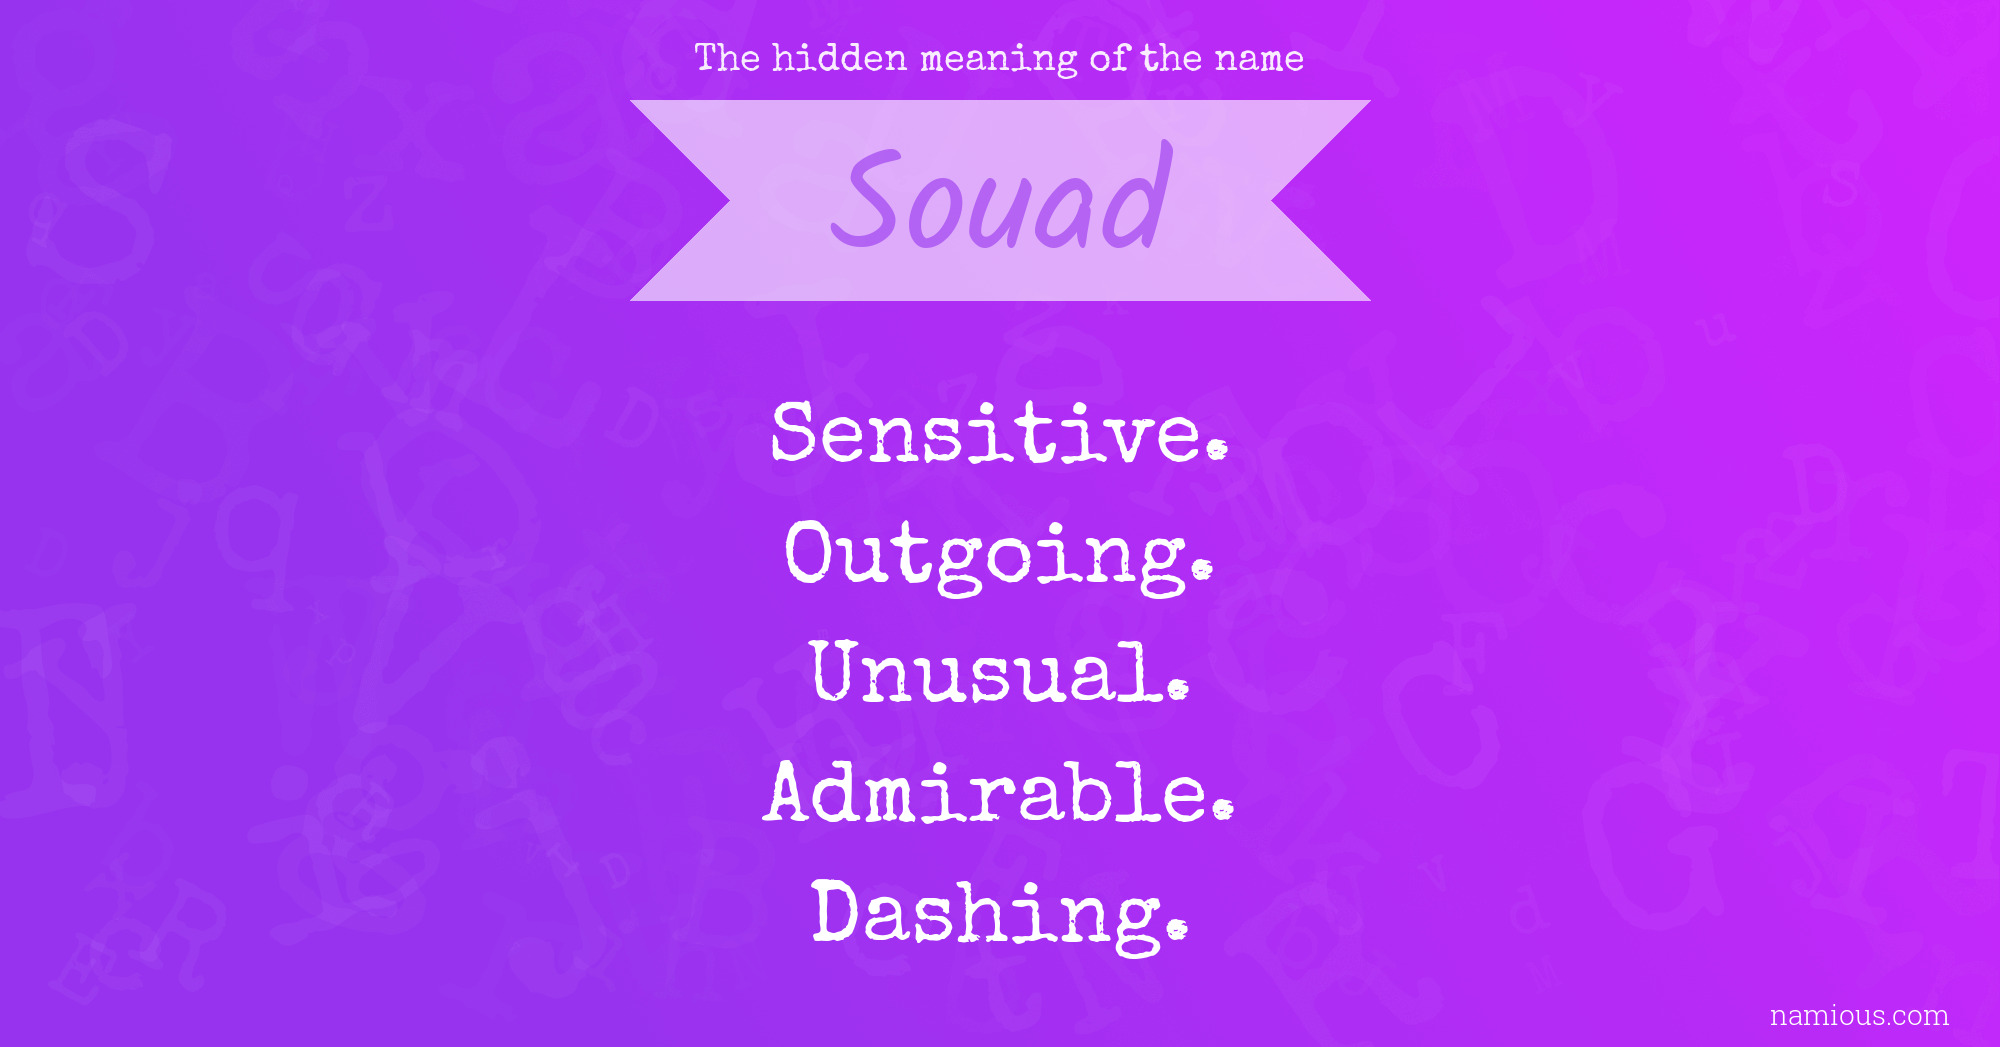 The hidden meaning of the name Souad